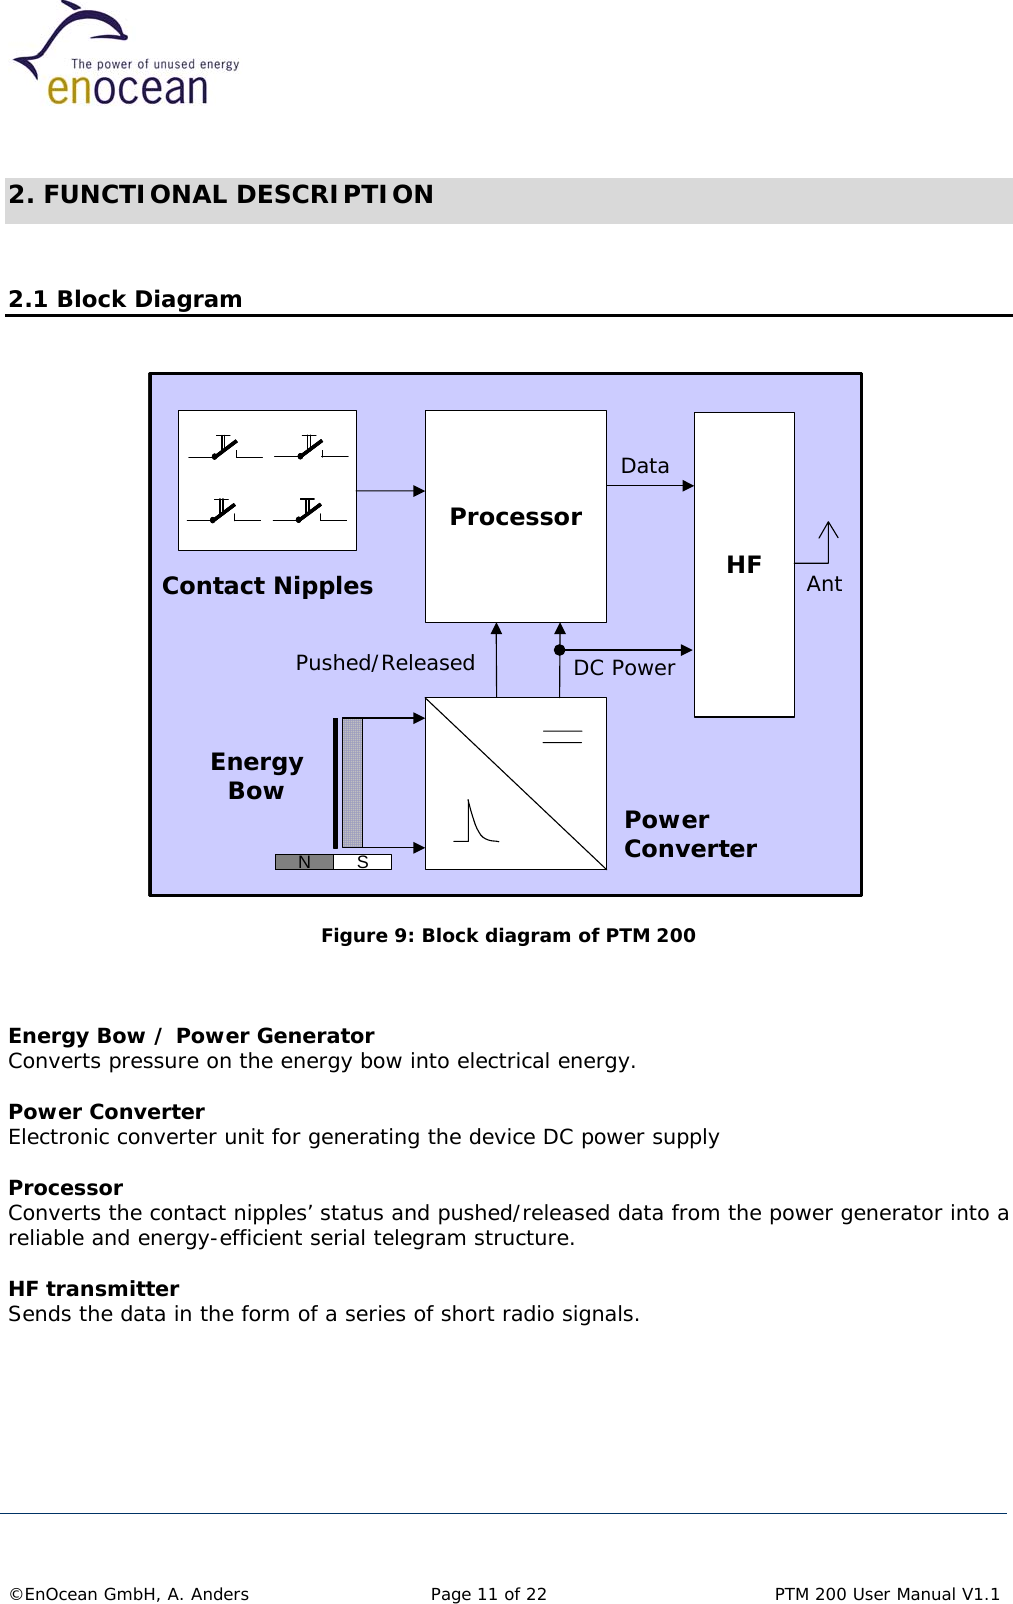   2. FUNCTIONAL DESCRIPTION  2.1 Block Diagram  ProcessorHFContact NipplesEnergyBow PowerConverterDataDC PowerPushed/ReleasedAntNSProcessorHFContact NipplesEnergyBow PowerConverterDataDC PowerPushed/ReleasedAntNSNS Figure 9: Block diagram of PTM 200    Energy Bow / Power Generator Converts pressure on the energy bow into electrical energy.  Power Converter Electronic converter unit for generating the device DC power supply  Processor Converts the contact nipples’ status and pushed/released data from the power generator into a reliable and energy-efficient serial telegram structure.  HF transmitter Sends the data in the form of a series of short radio signals.        ©EnOcean GmbH, A. Anders   Page 11 of 22    PTM 200 User Manual V1.1  